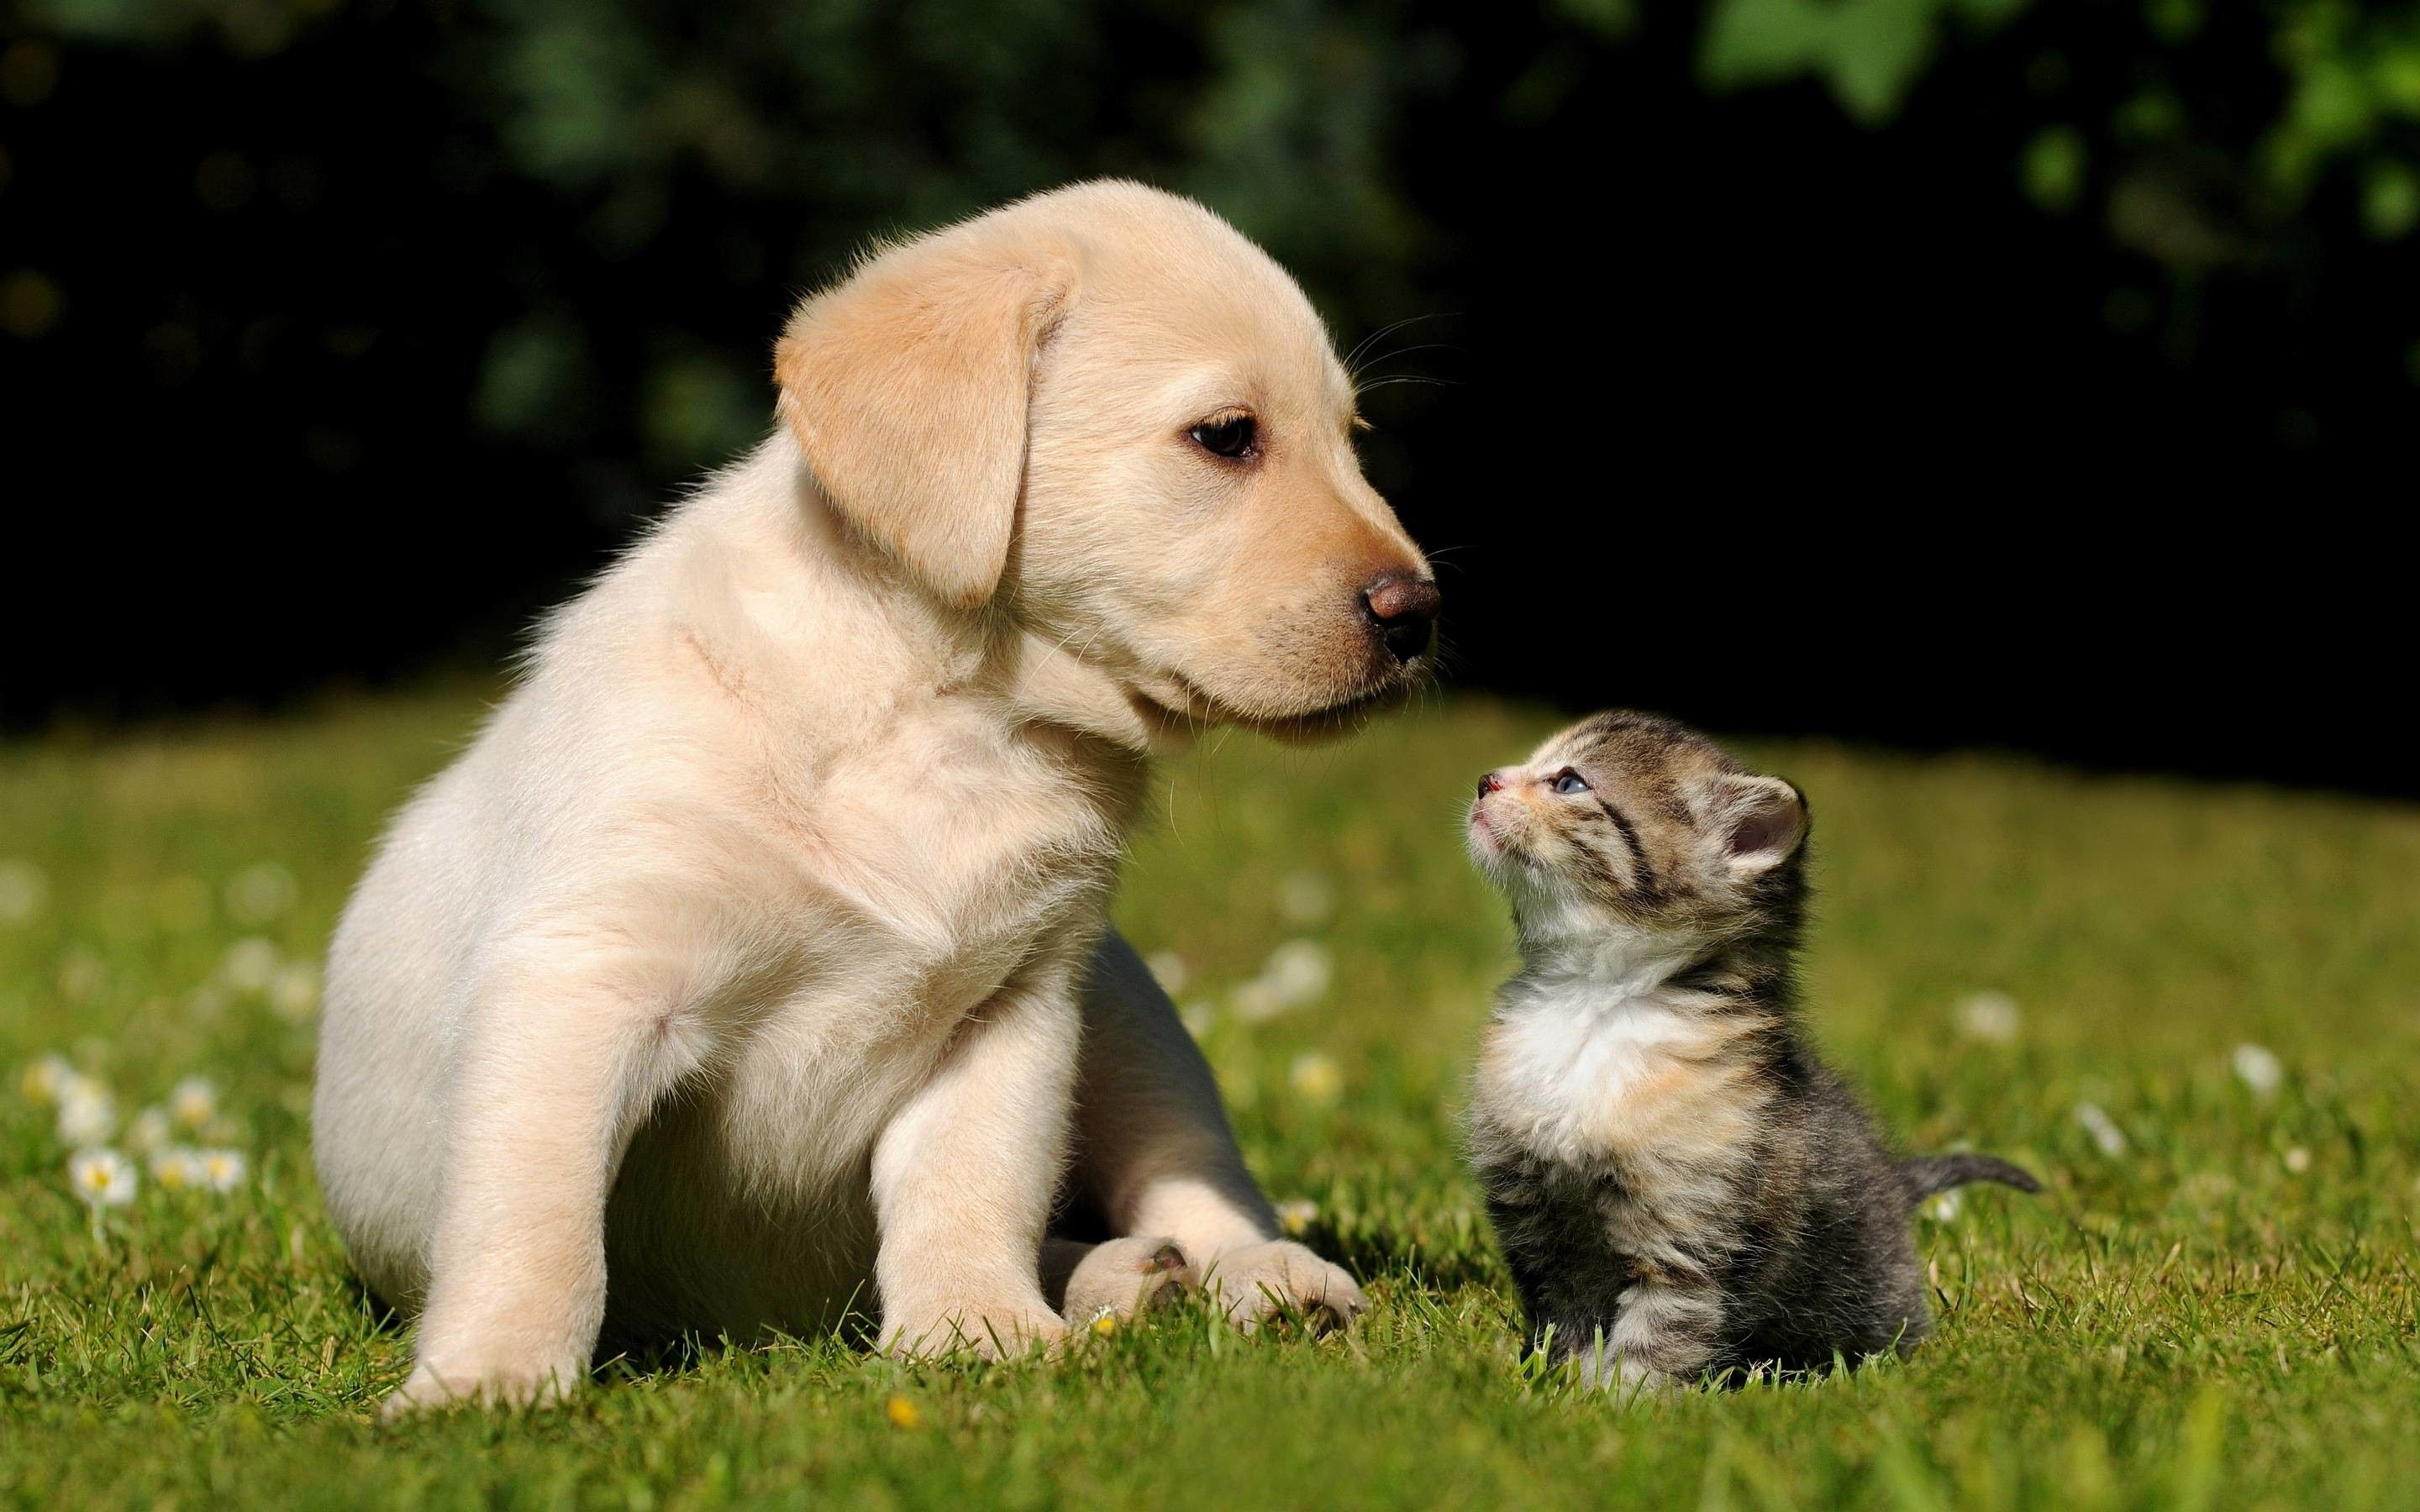 Cute Puppies and Kittens Wallpapers on